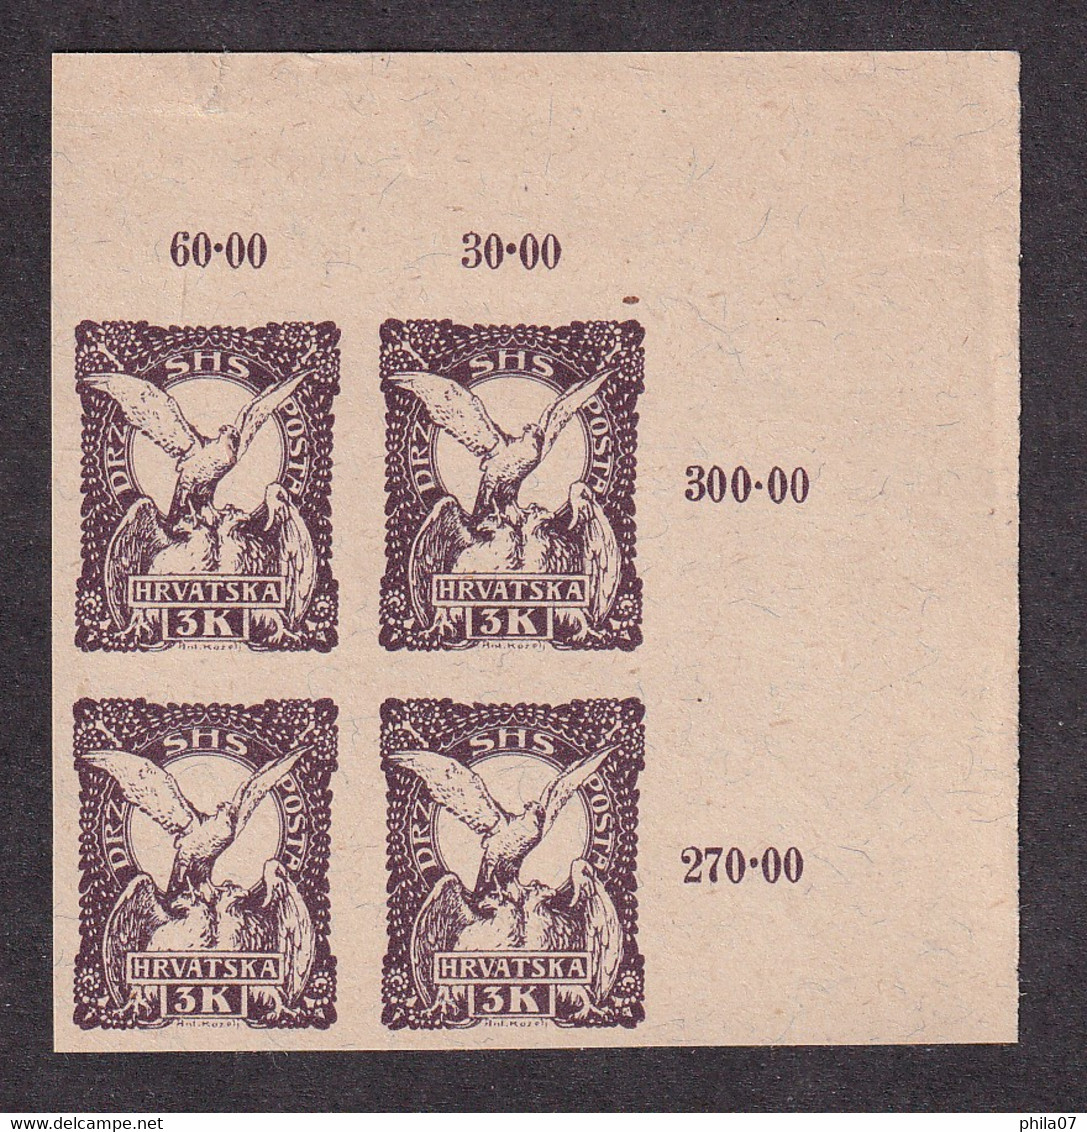 STATE OF SLOVENES, CROATS AND SERBS PS.No. 46 - Short Opinion Pervan - Imperforate Trial Print Of Stamp Of ... / 3 Scans - Nuevos